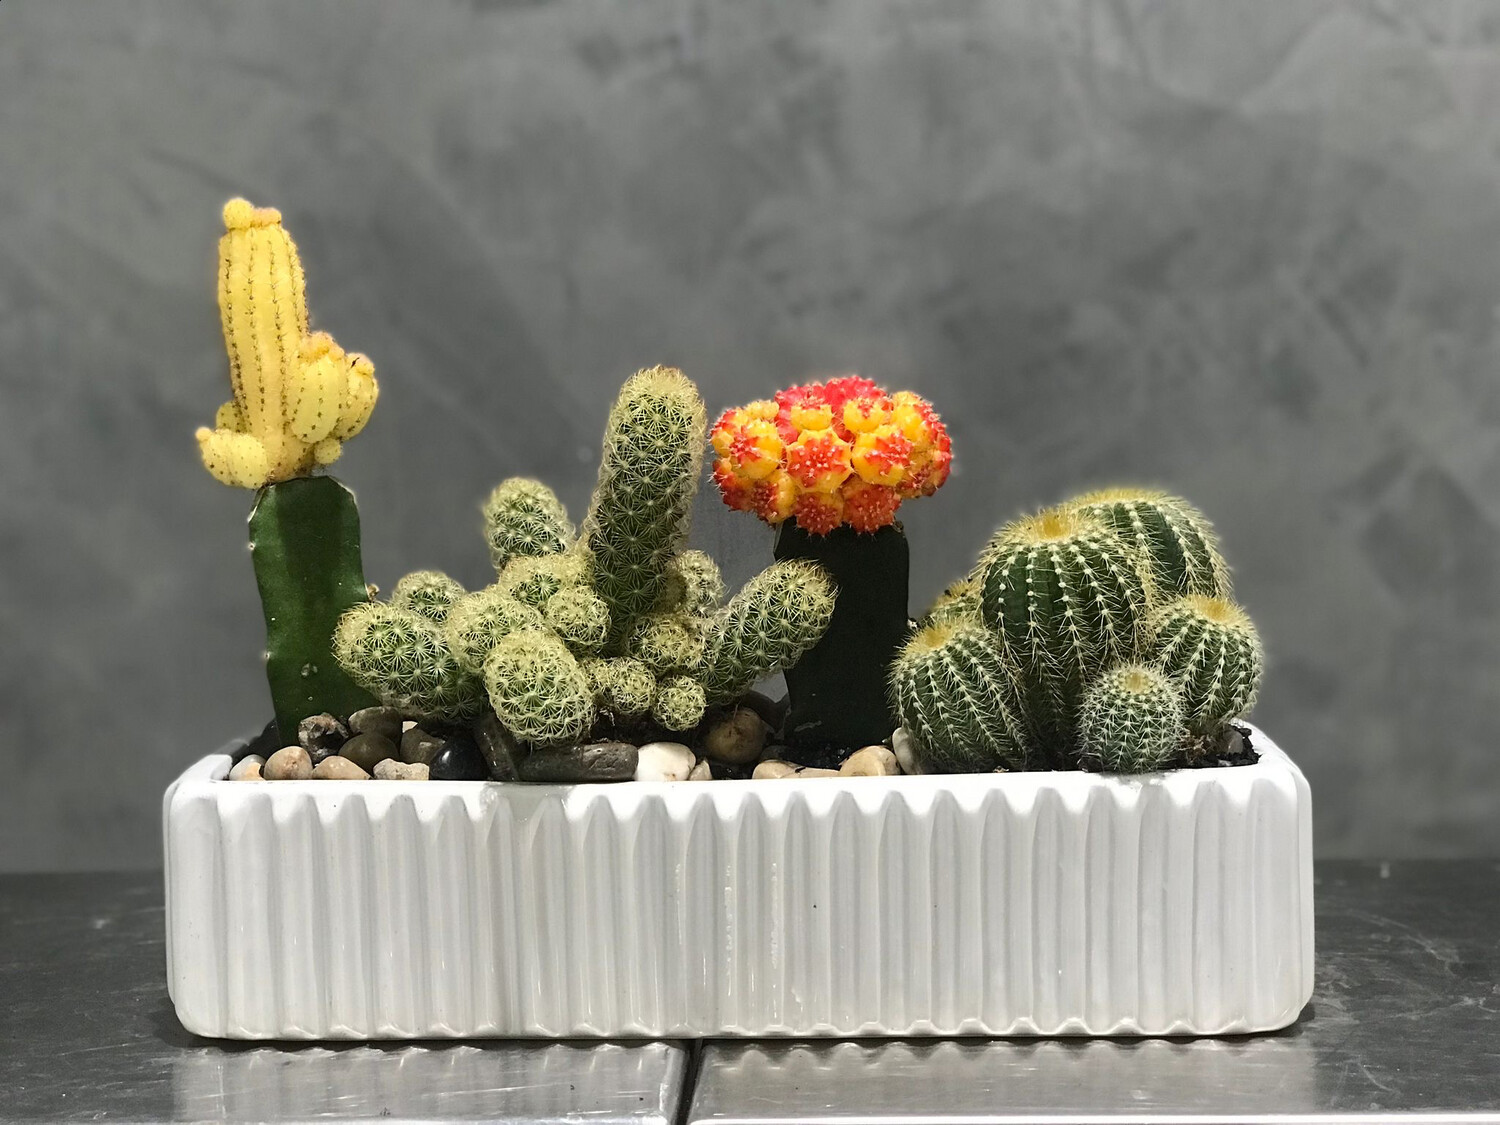 Cactusset with special cactus